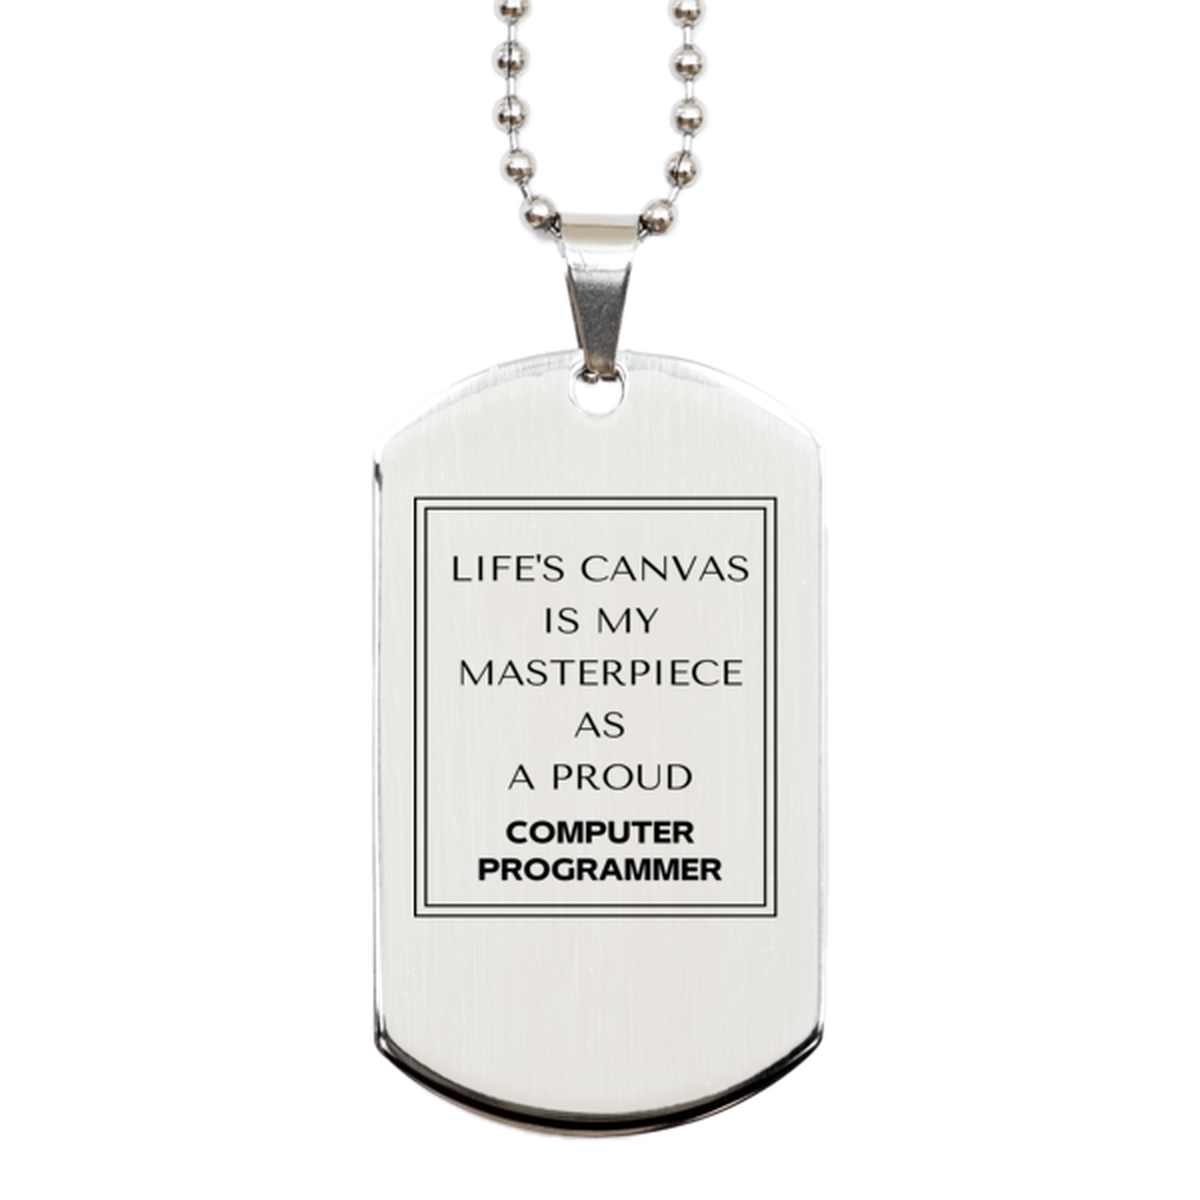 Proud Computer Programmer Gifts, Life's canvas is my masterpiece, Epic Birthday Christmas Unique Silver Dog Tag For Computer Programmer, Coworkers, Men, Women, Friends